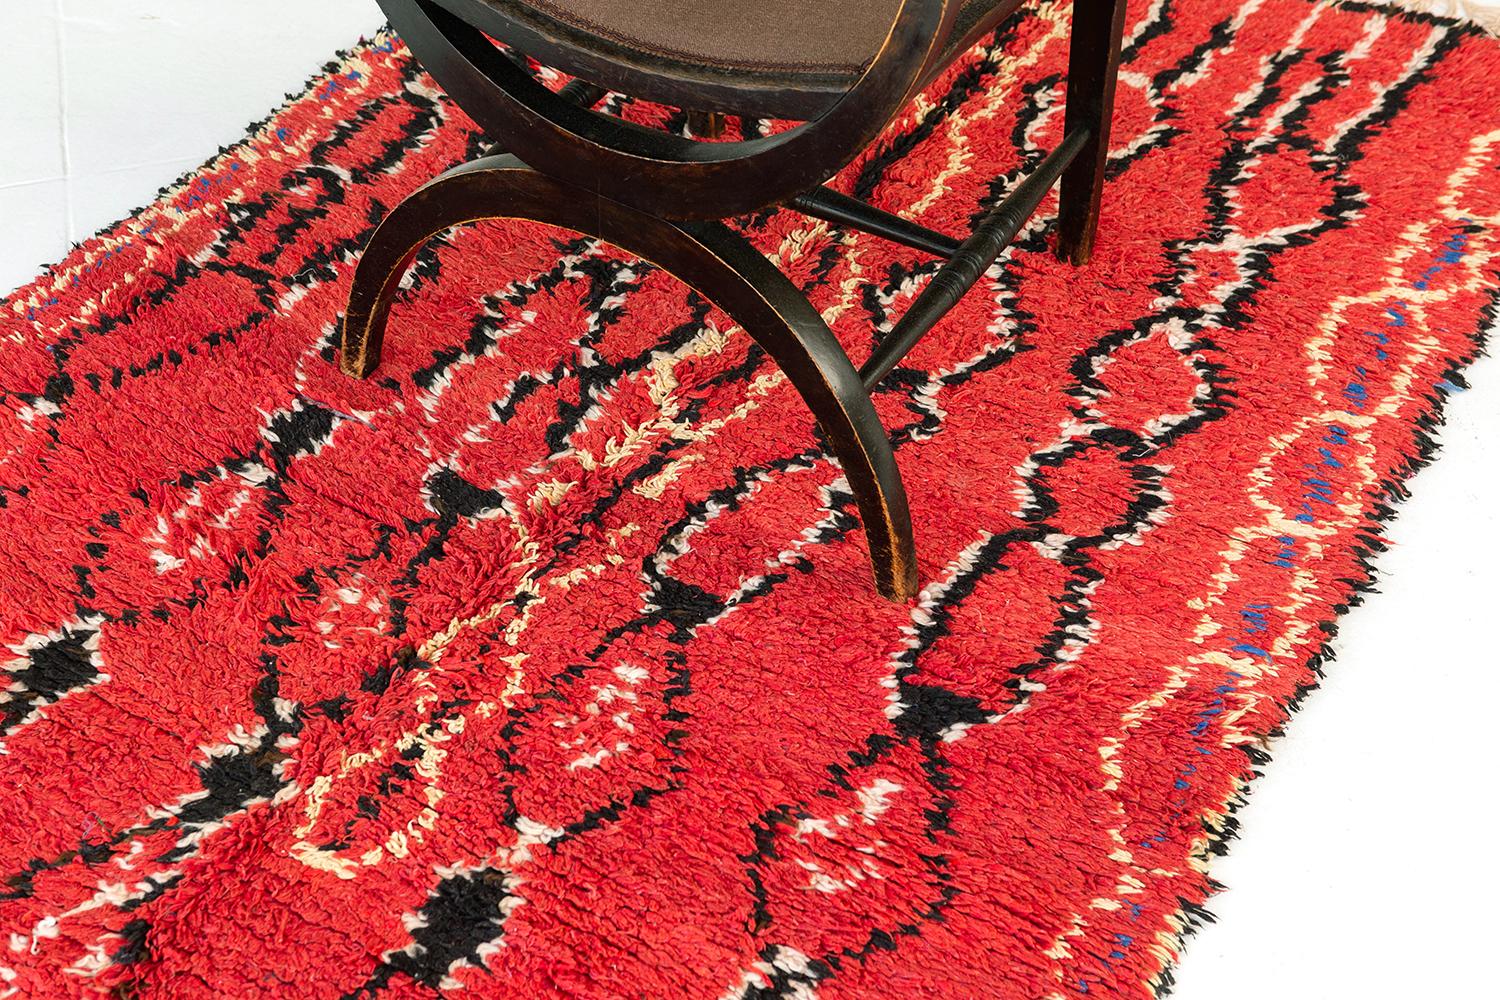 Cherry red pile field with diamond chains rendered in black and ivory wool. Pale gold and cobalt blue elements enlarge the palette and black filled spaces add weight. This is a vivid and graphical composition. A unique vintage tribal rug from the